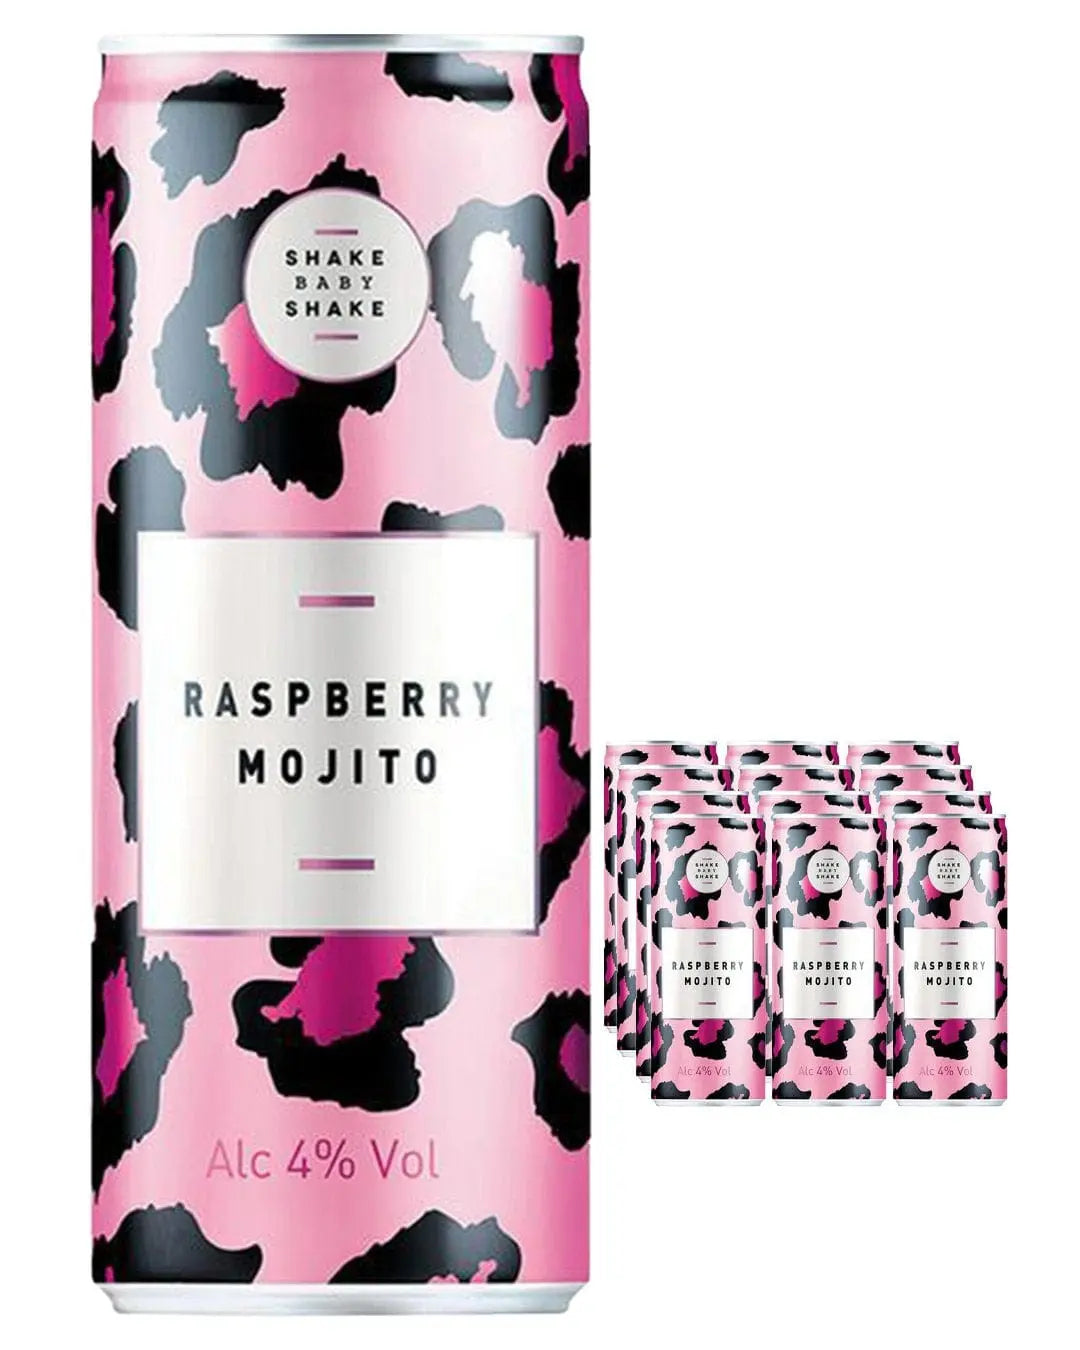 Shake Baby Shake Raspberry Mojito Premixed Cocktail Multipack, 12 x 250 ml Ready Made Cocktails